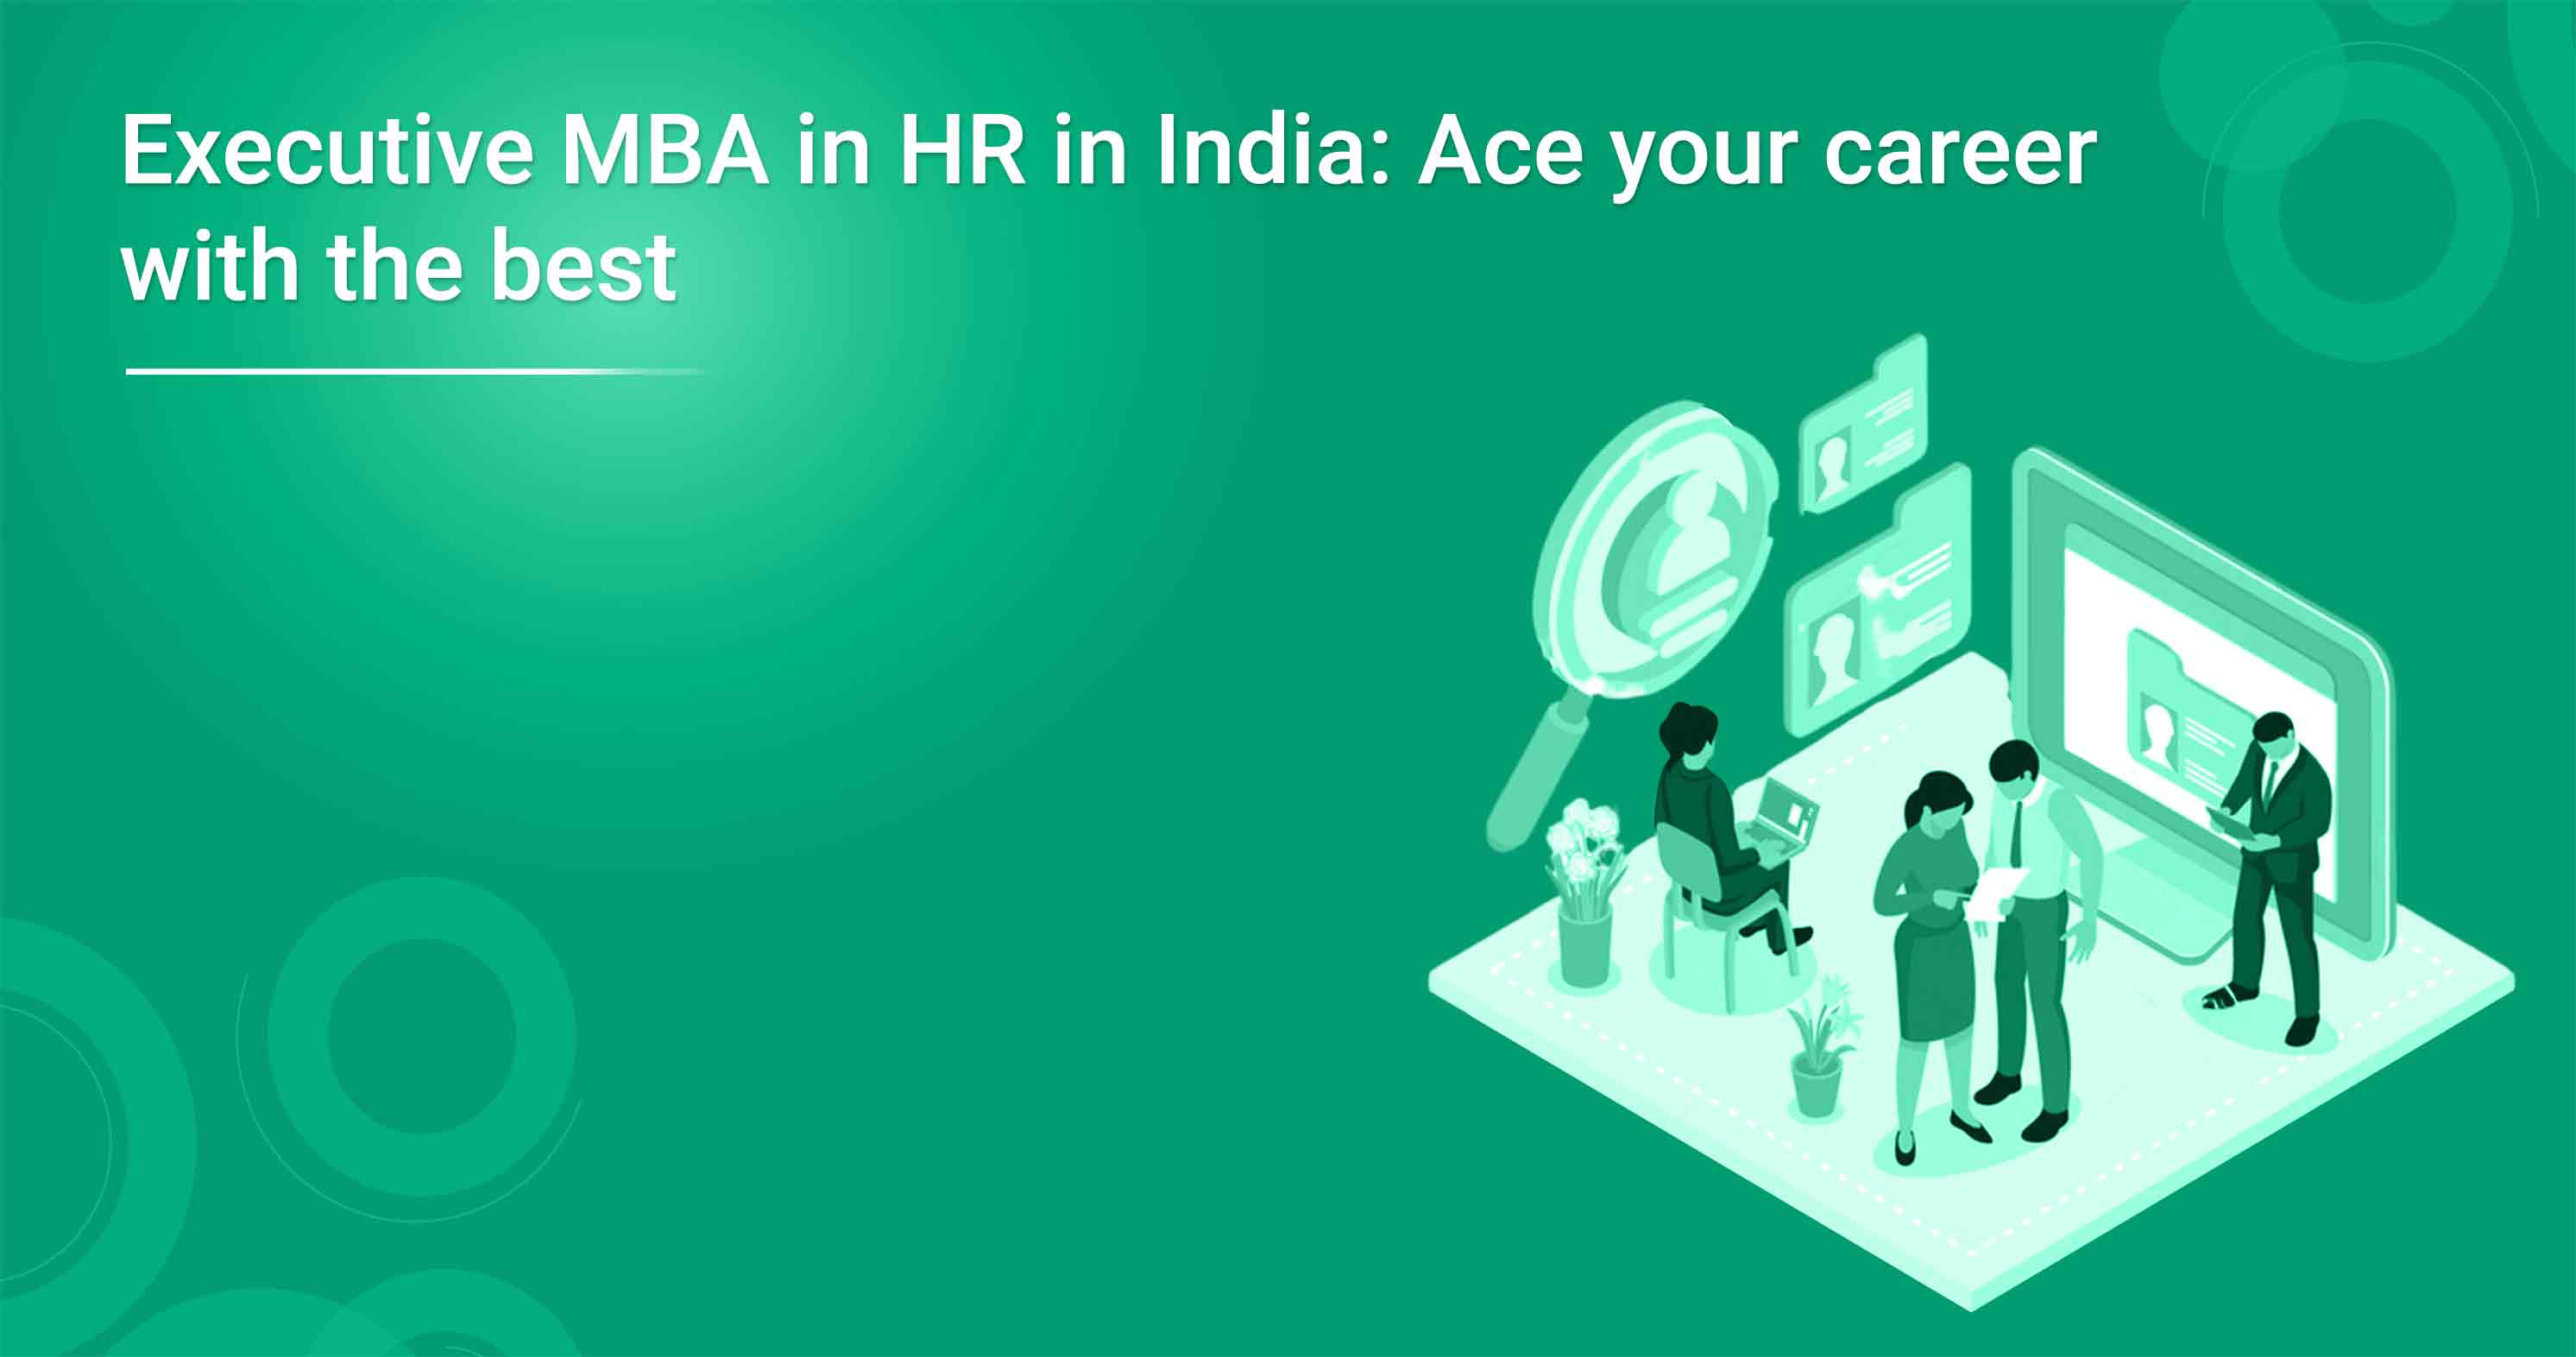 Executive MBA in HR in India: Ace your career with the best